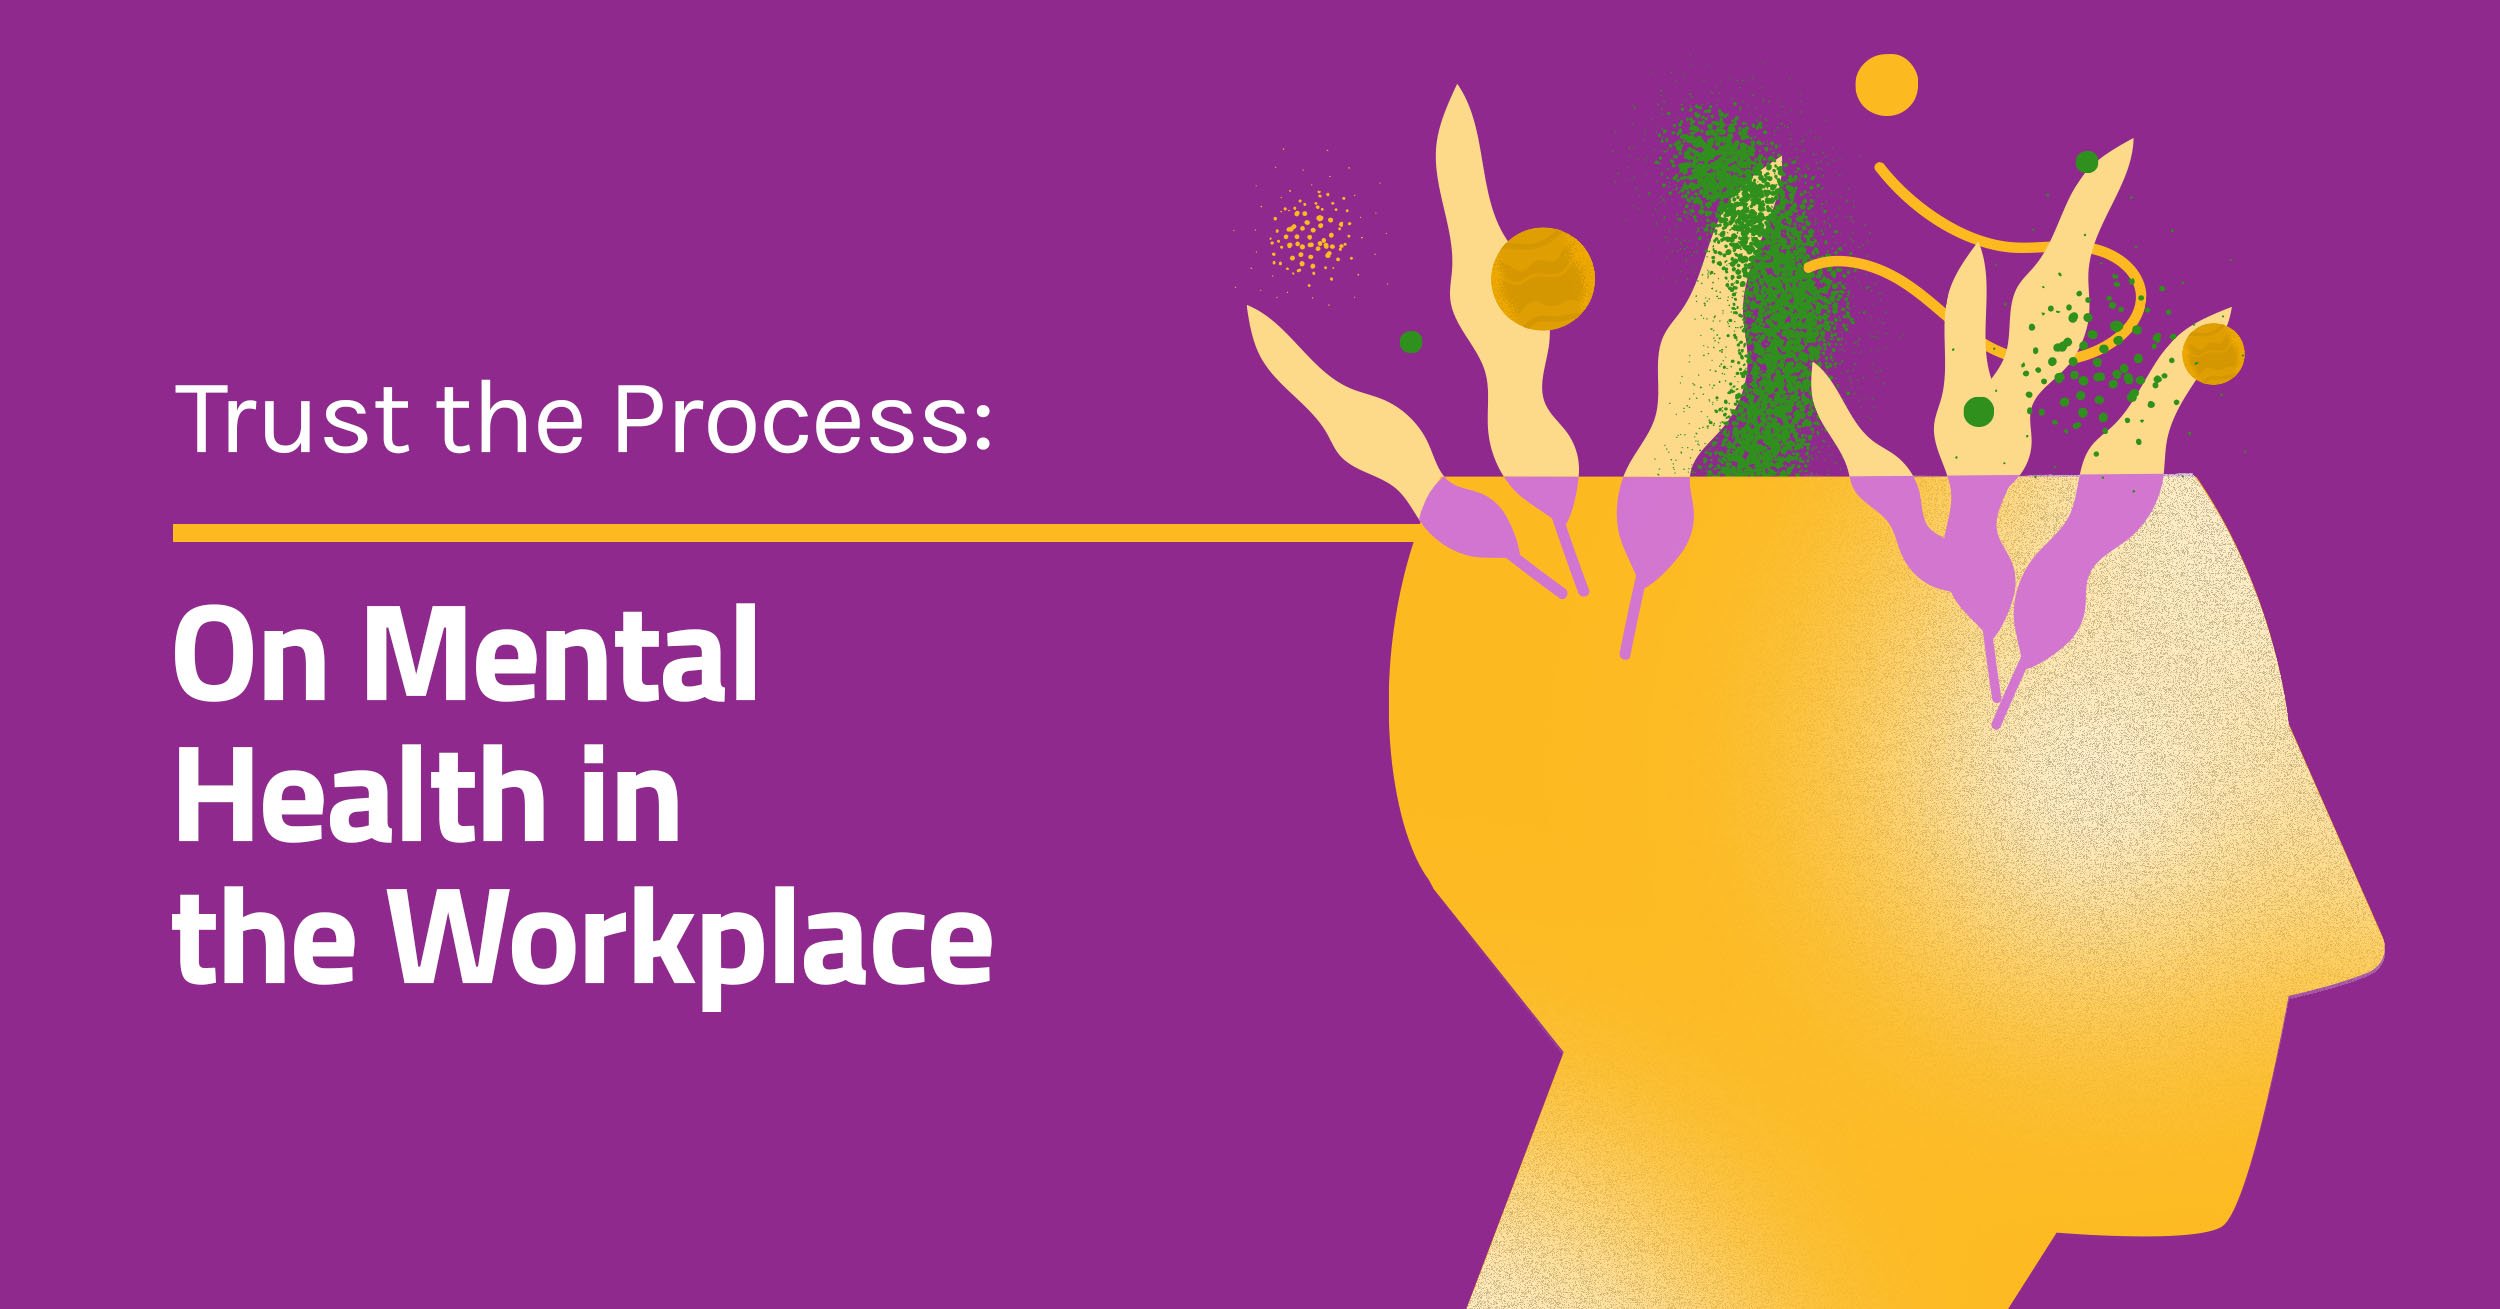 Trust the process on mental health in the workplace